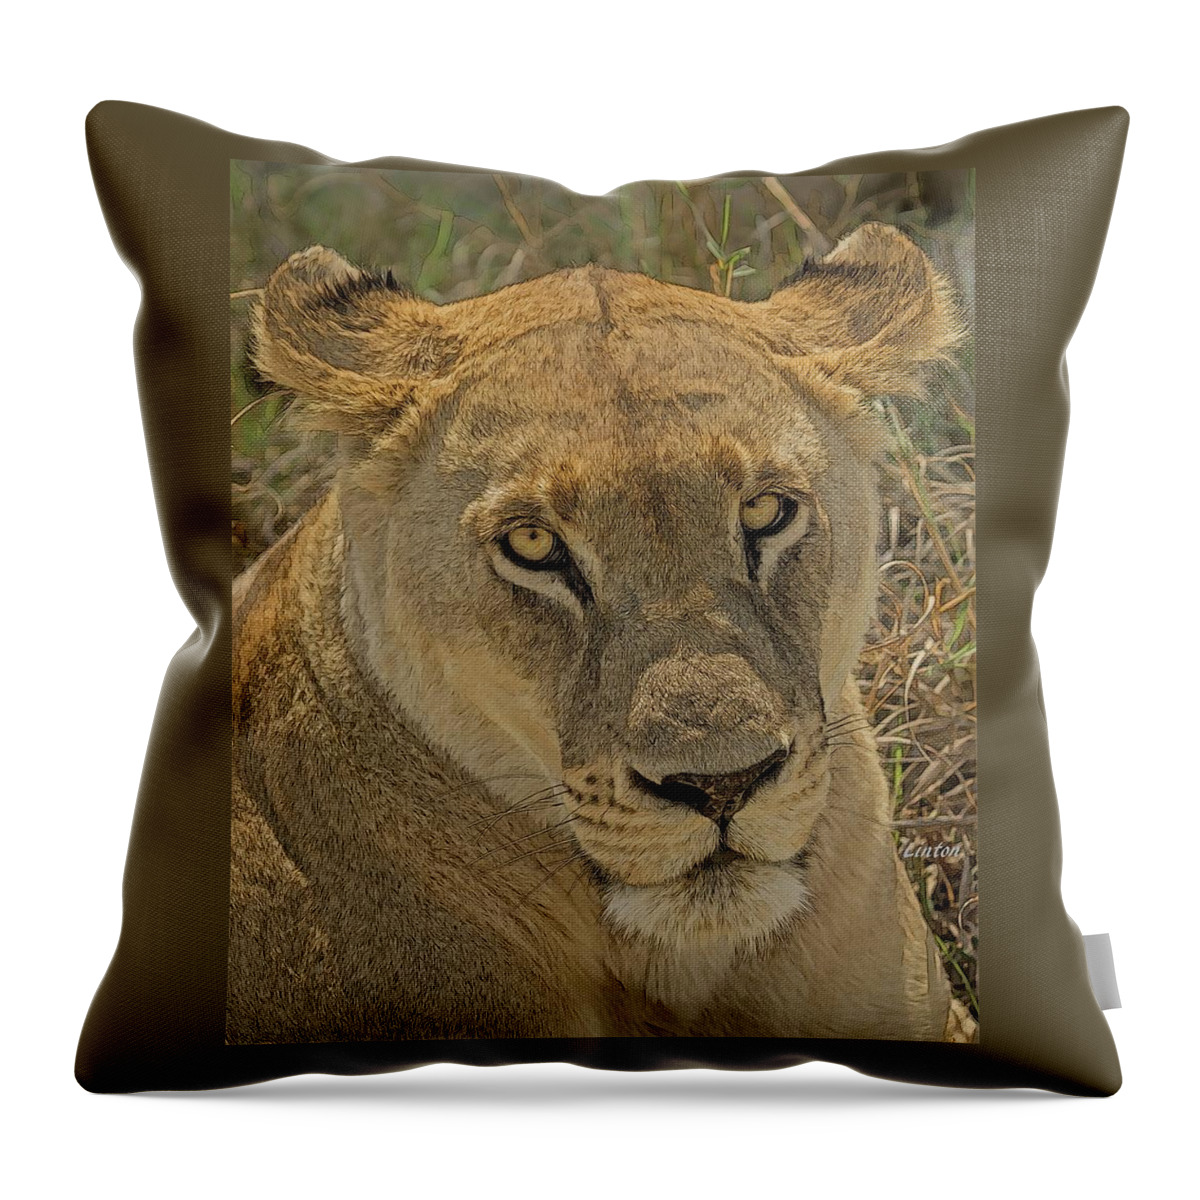 Lion Throw Pillow featuring the digital art Lioness by Larry Linton